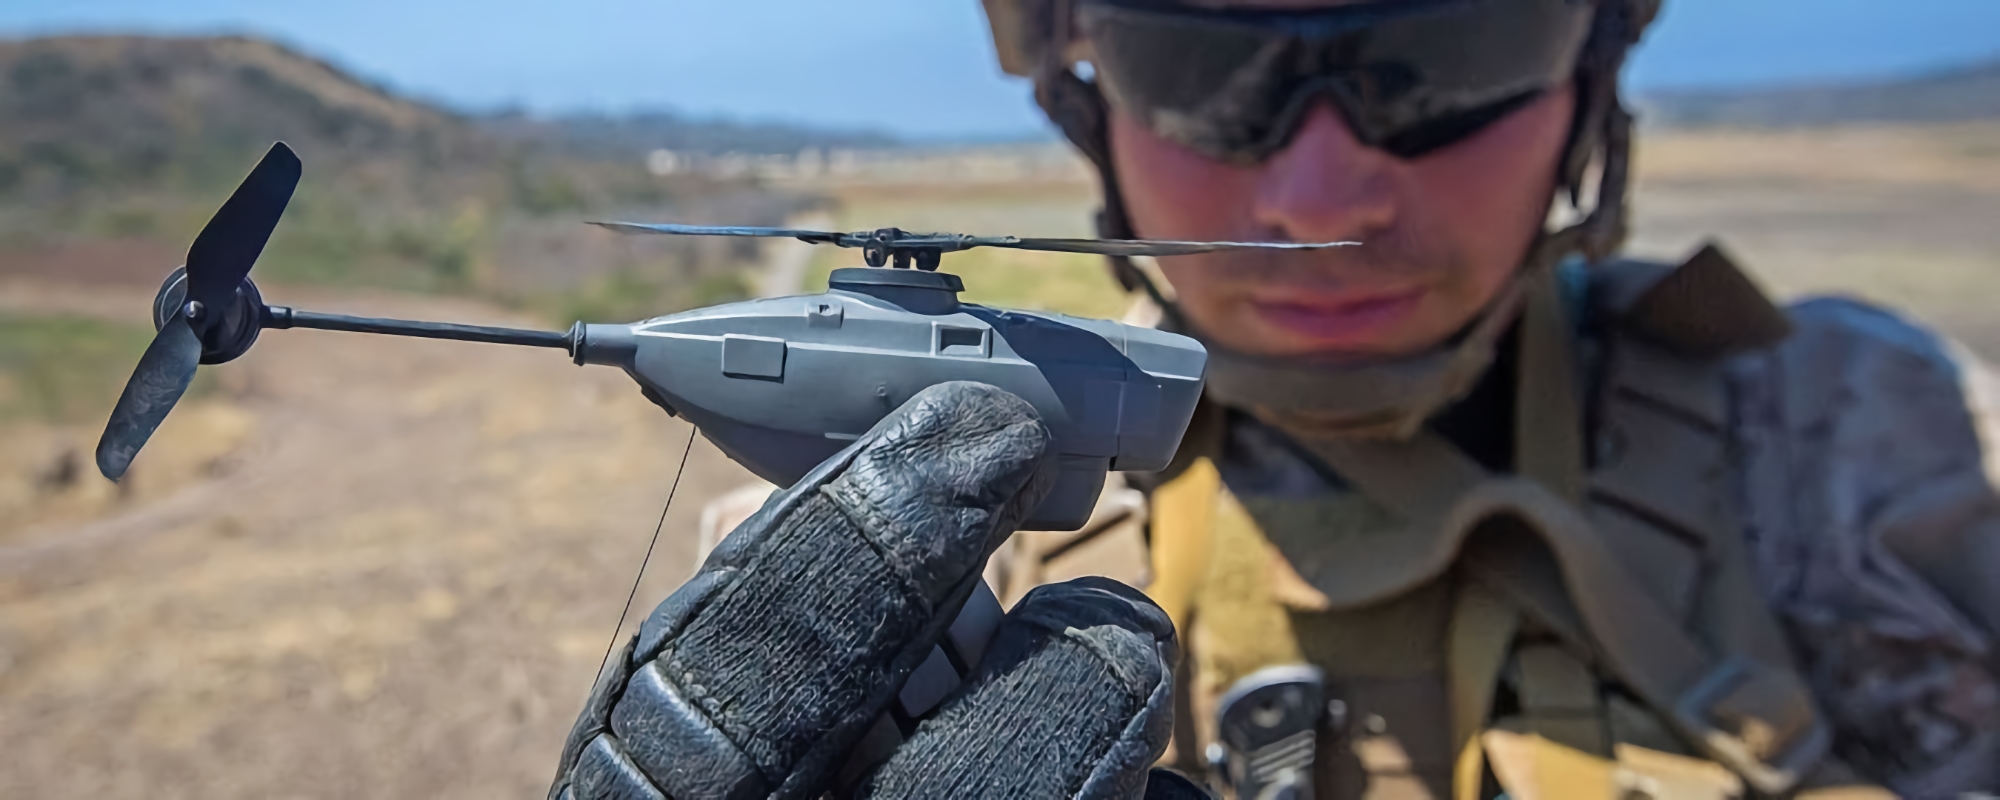 The AFU is already using Black Hornet Nano micro drones, they fit in your hand and are designed for urban warfare